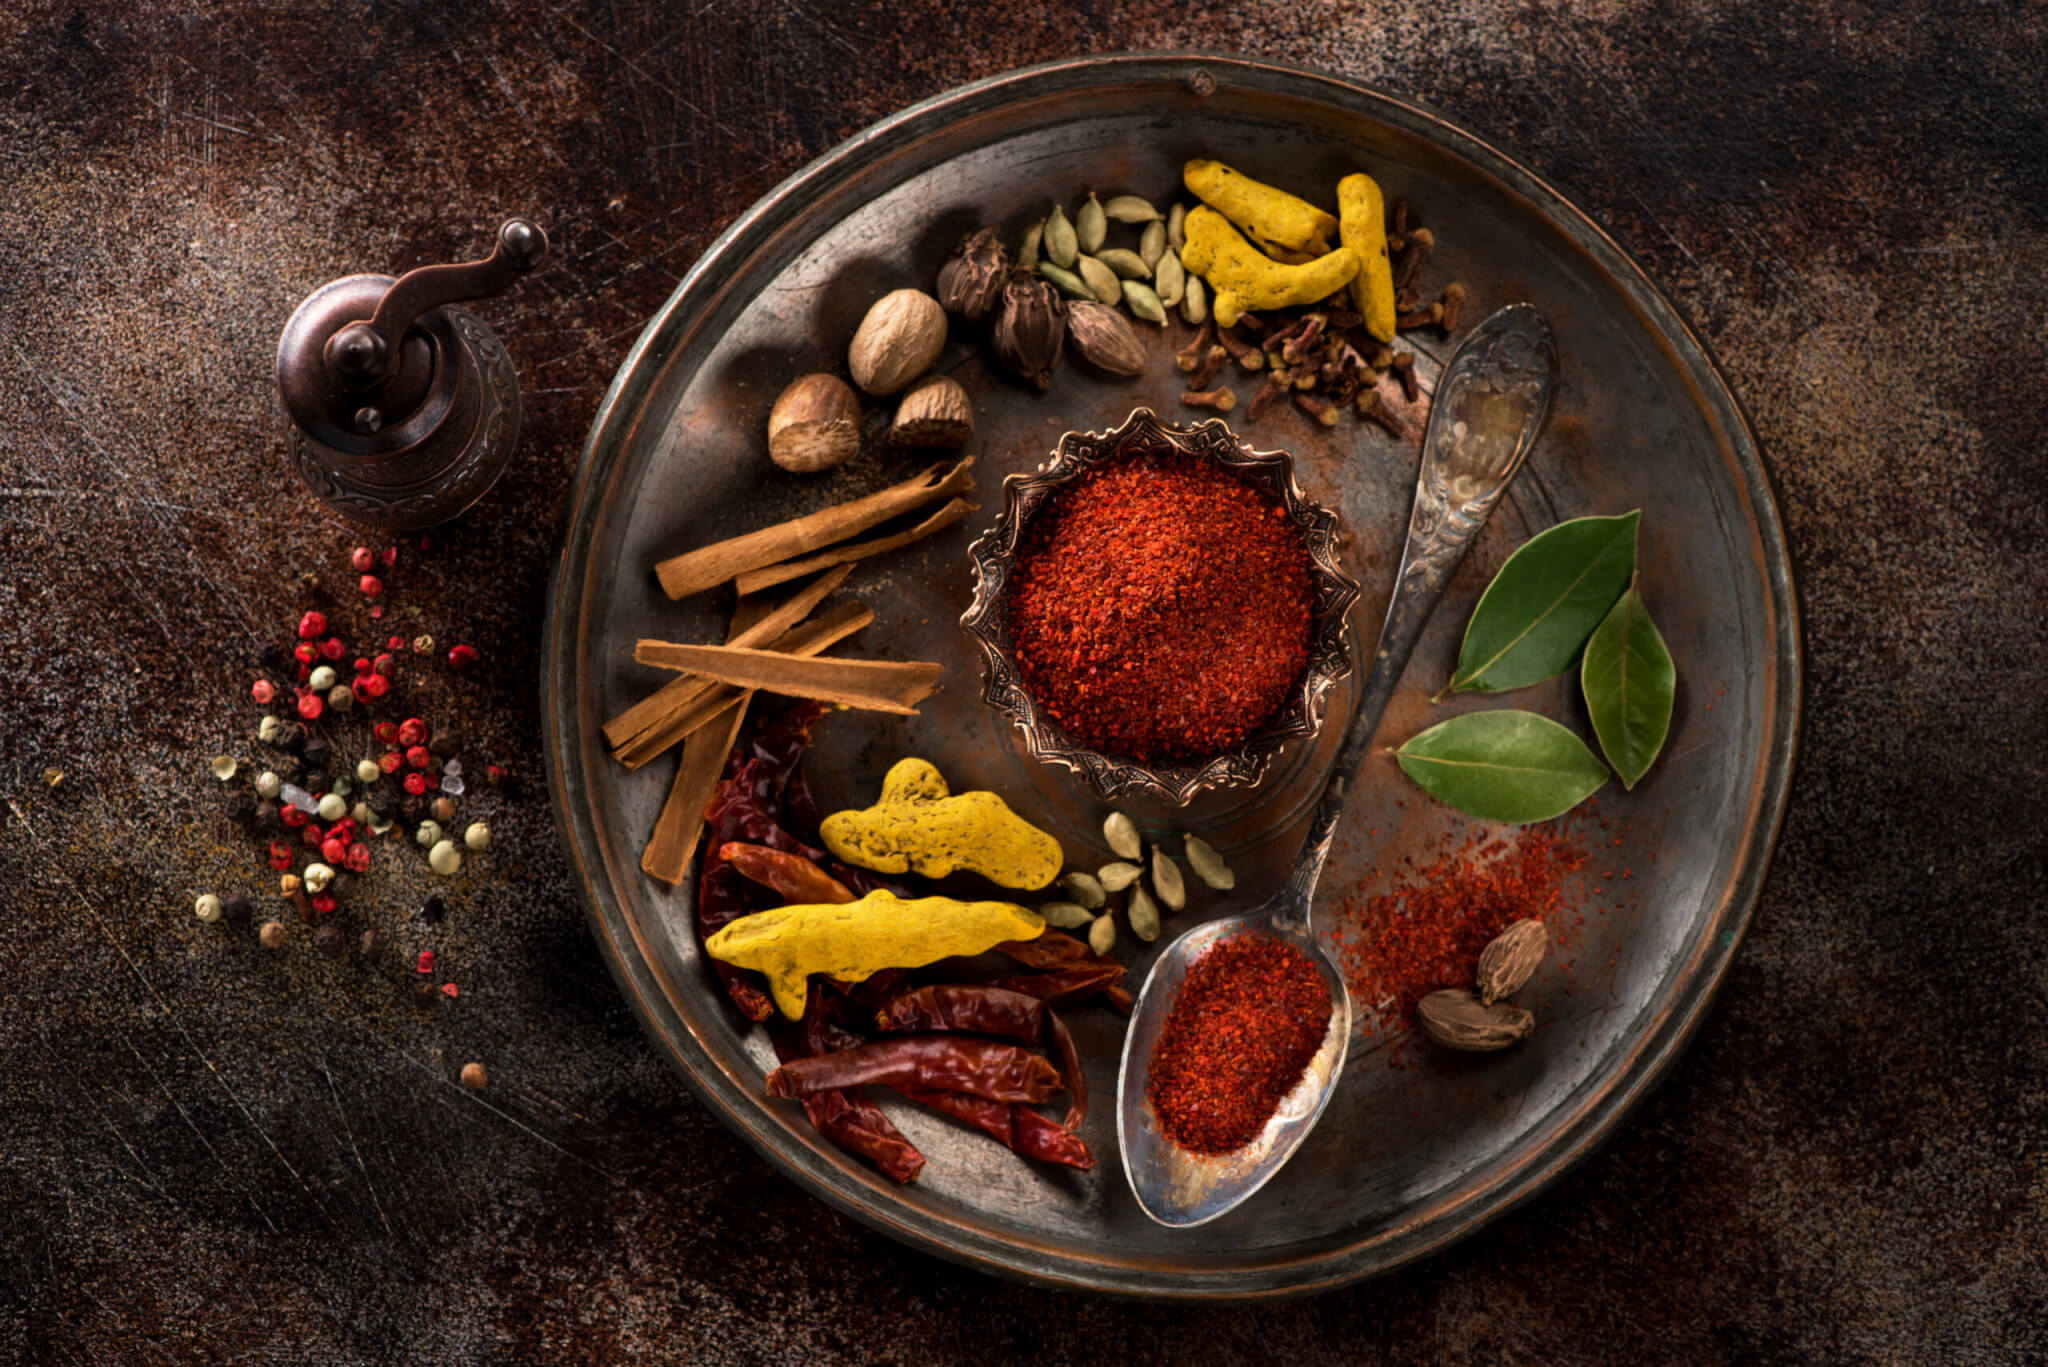 National Herbs and Spices Day (June 10th)